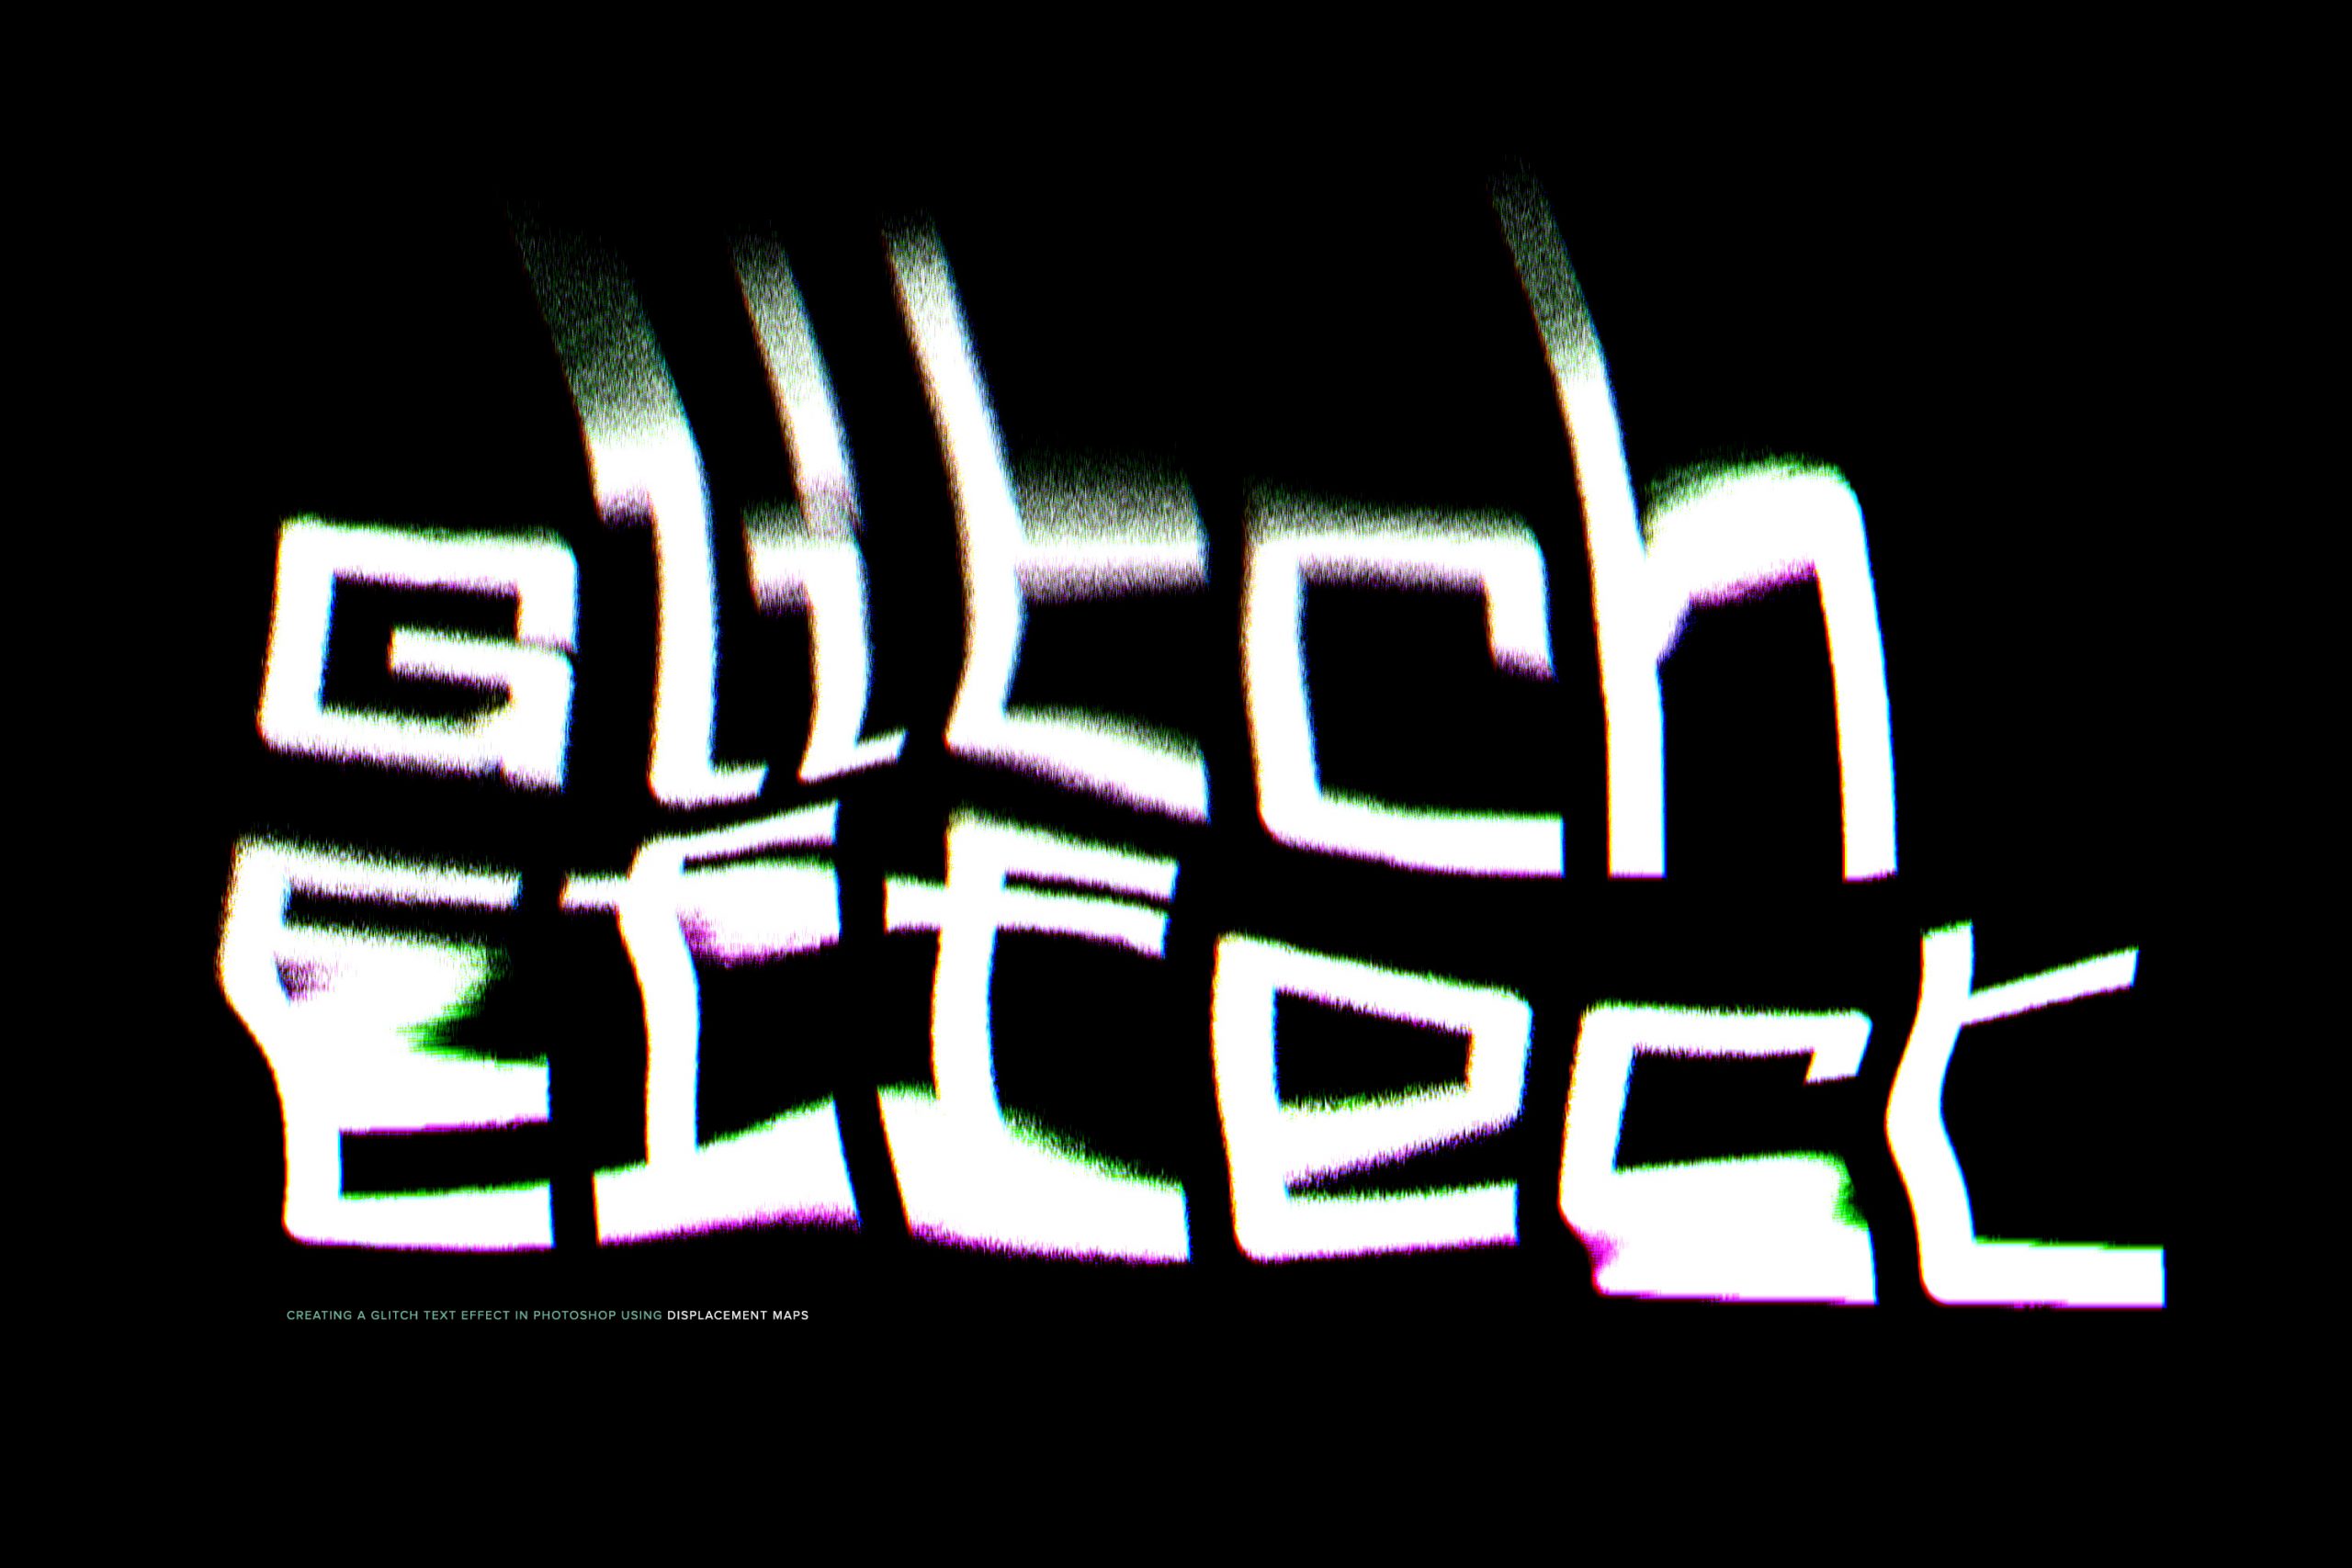 Creating a Glitch Text Effect in Photoshop Using Displacement Maps